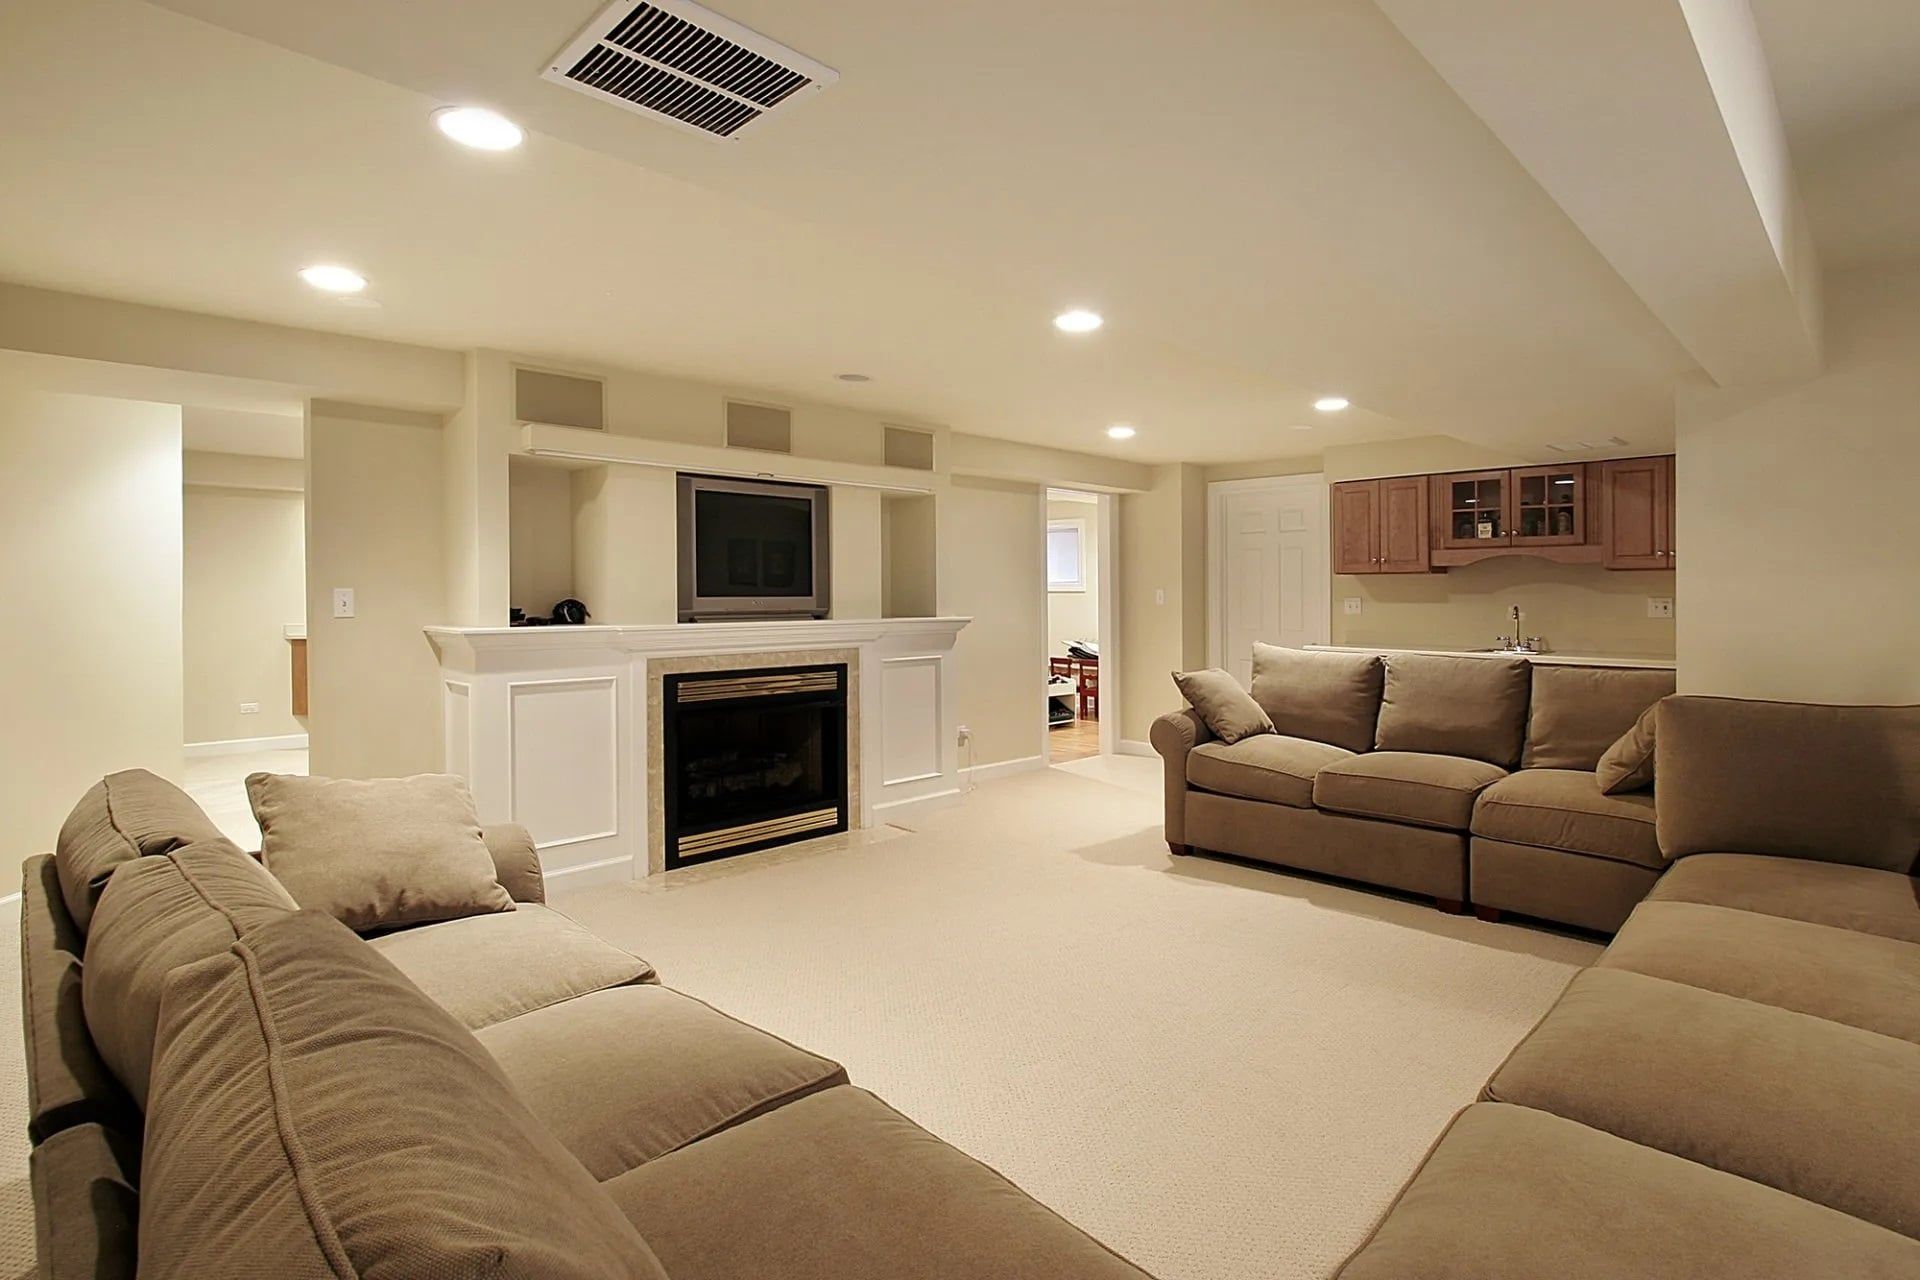 How to Choose a Basement Remodeling Company